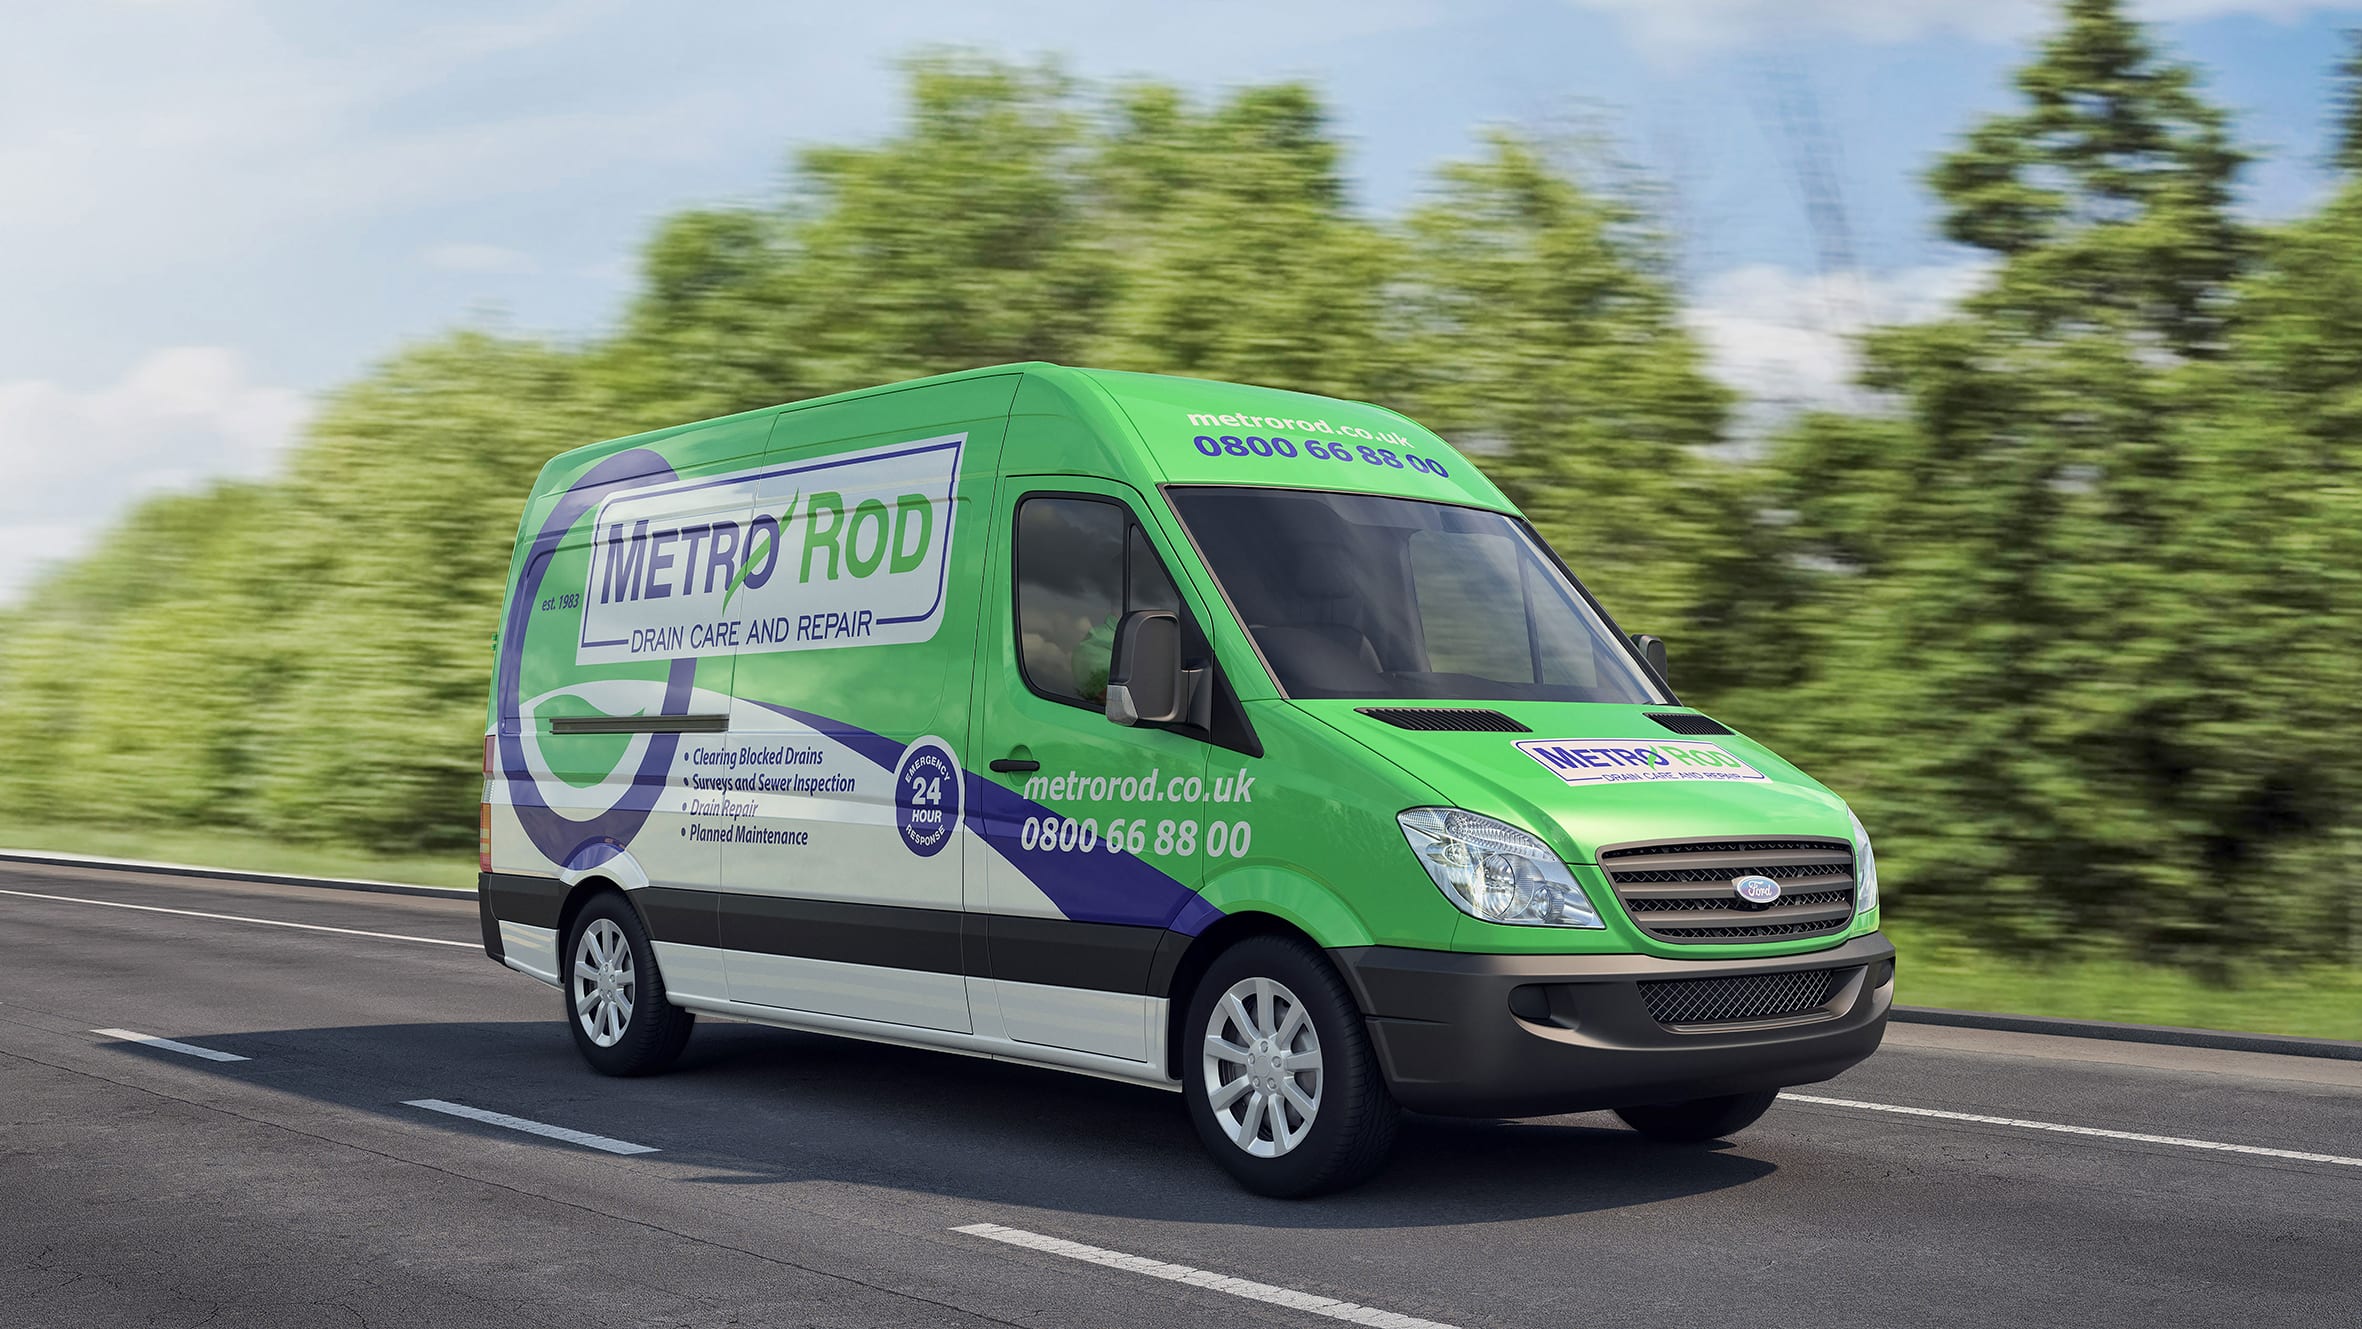 Metro Rod Norwich Invests In More CCTV Survey Equipment